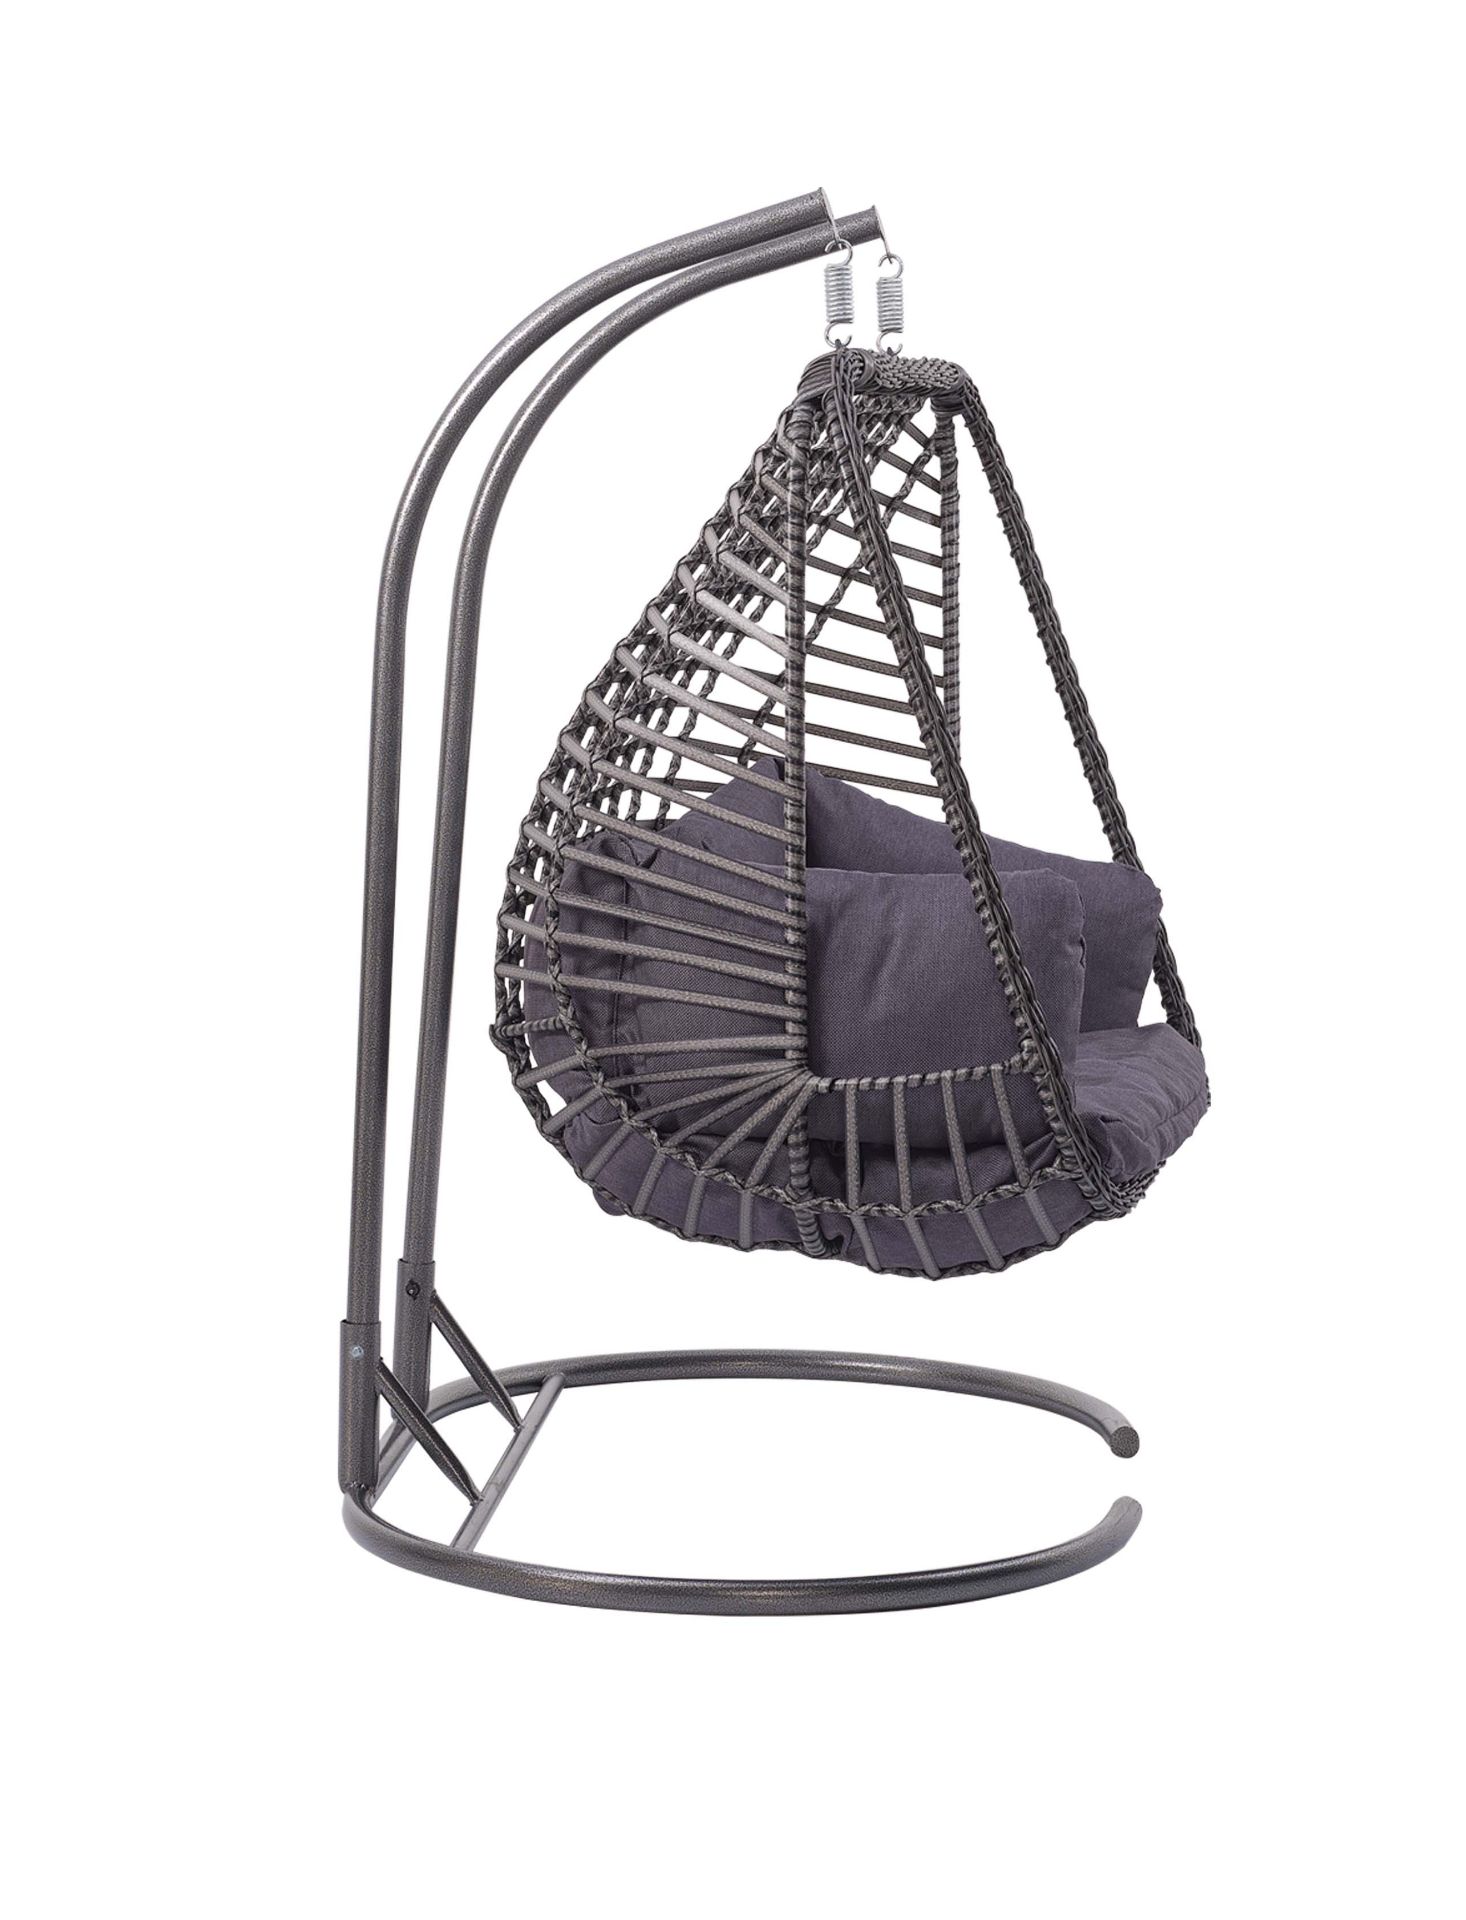 + VAT Brand New Chelsea Garden Company Rattan Double Hanging Swing Chair - Item is Available Aprox - Image 2 of 2